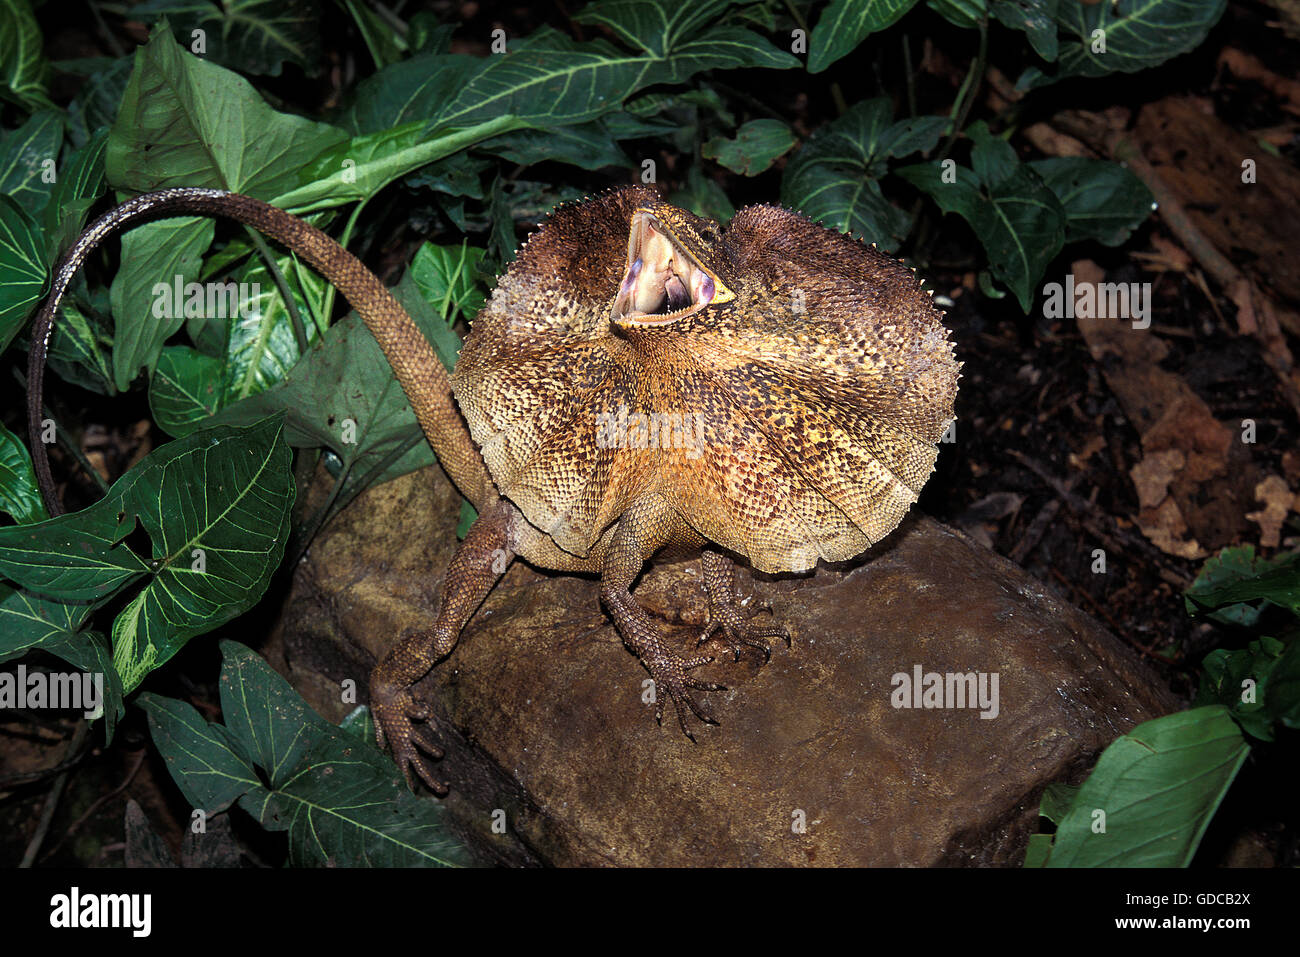 Frill necked Lizard, chlamydosaurus kingii, Adult with Frill Raised and Open Mouth, Defensive Posture, Australia Stock Photo